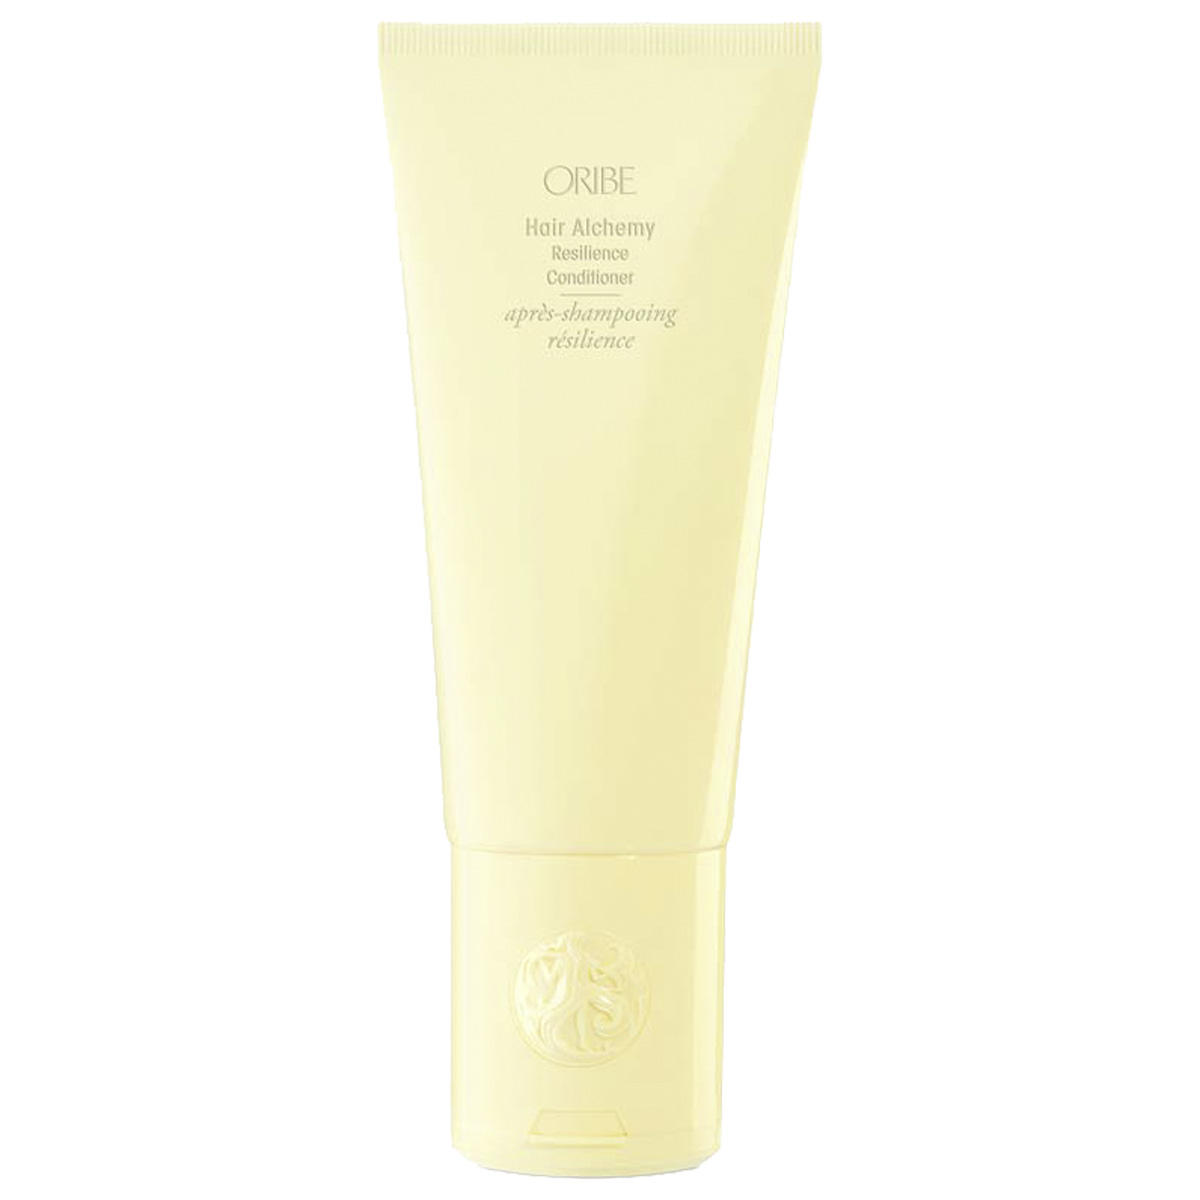 Oribe Hair Alchemy Resilience Conditioner  - 1